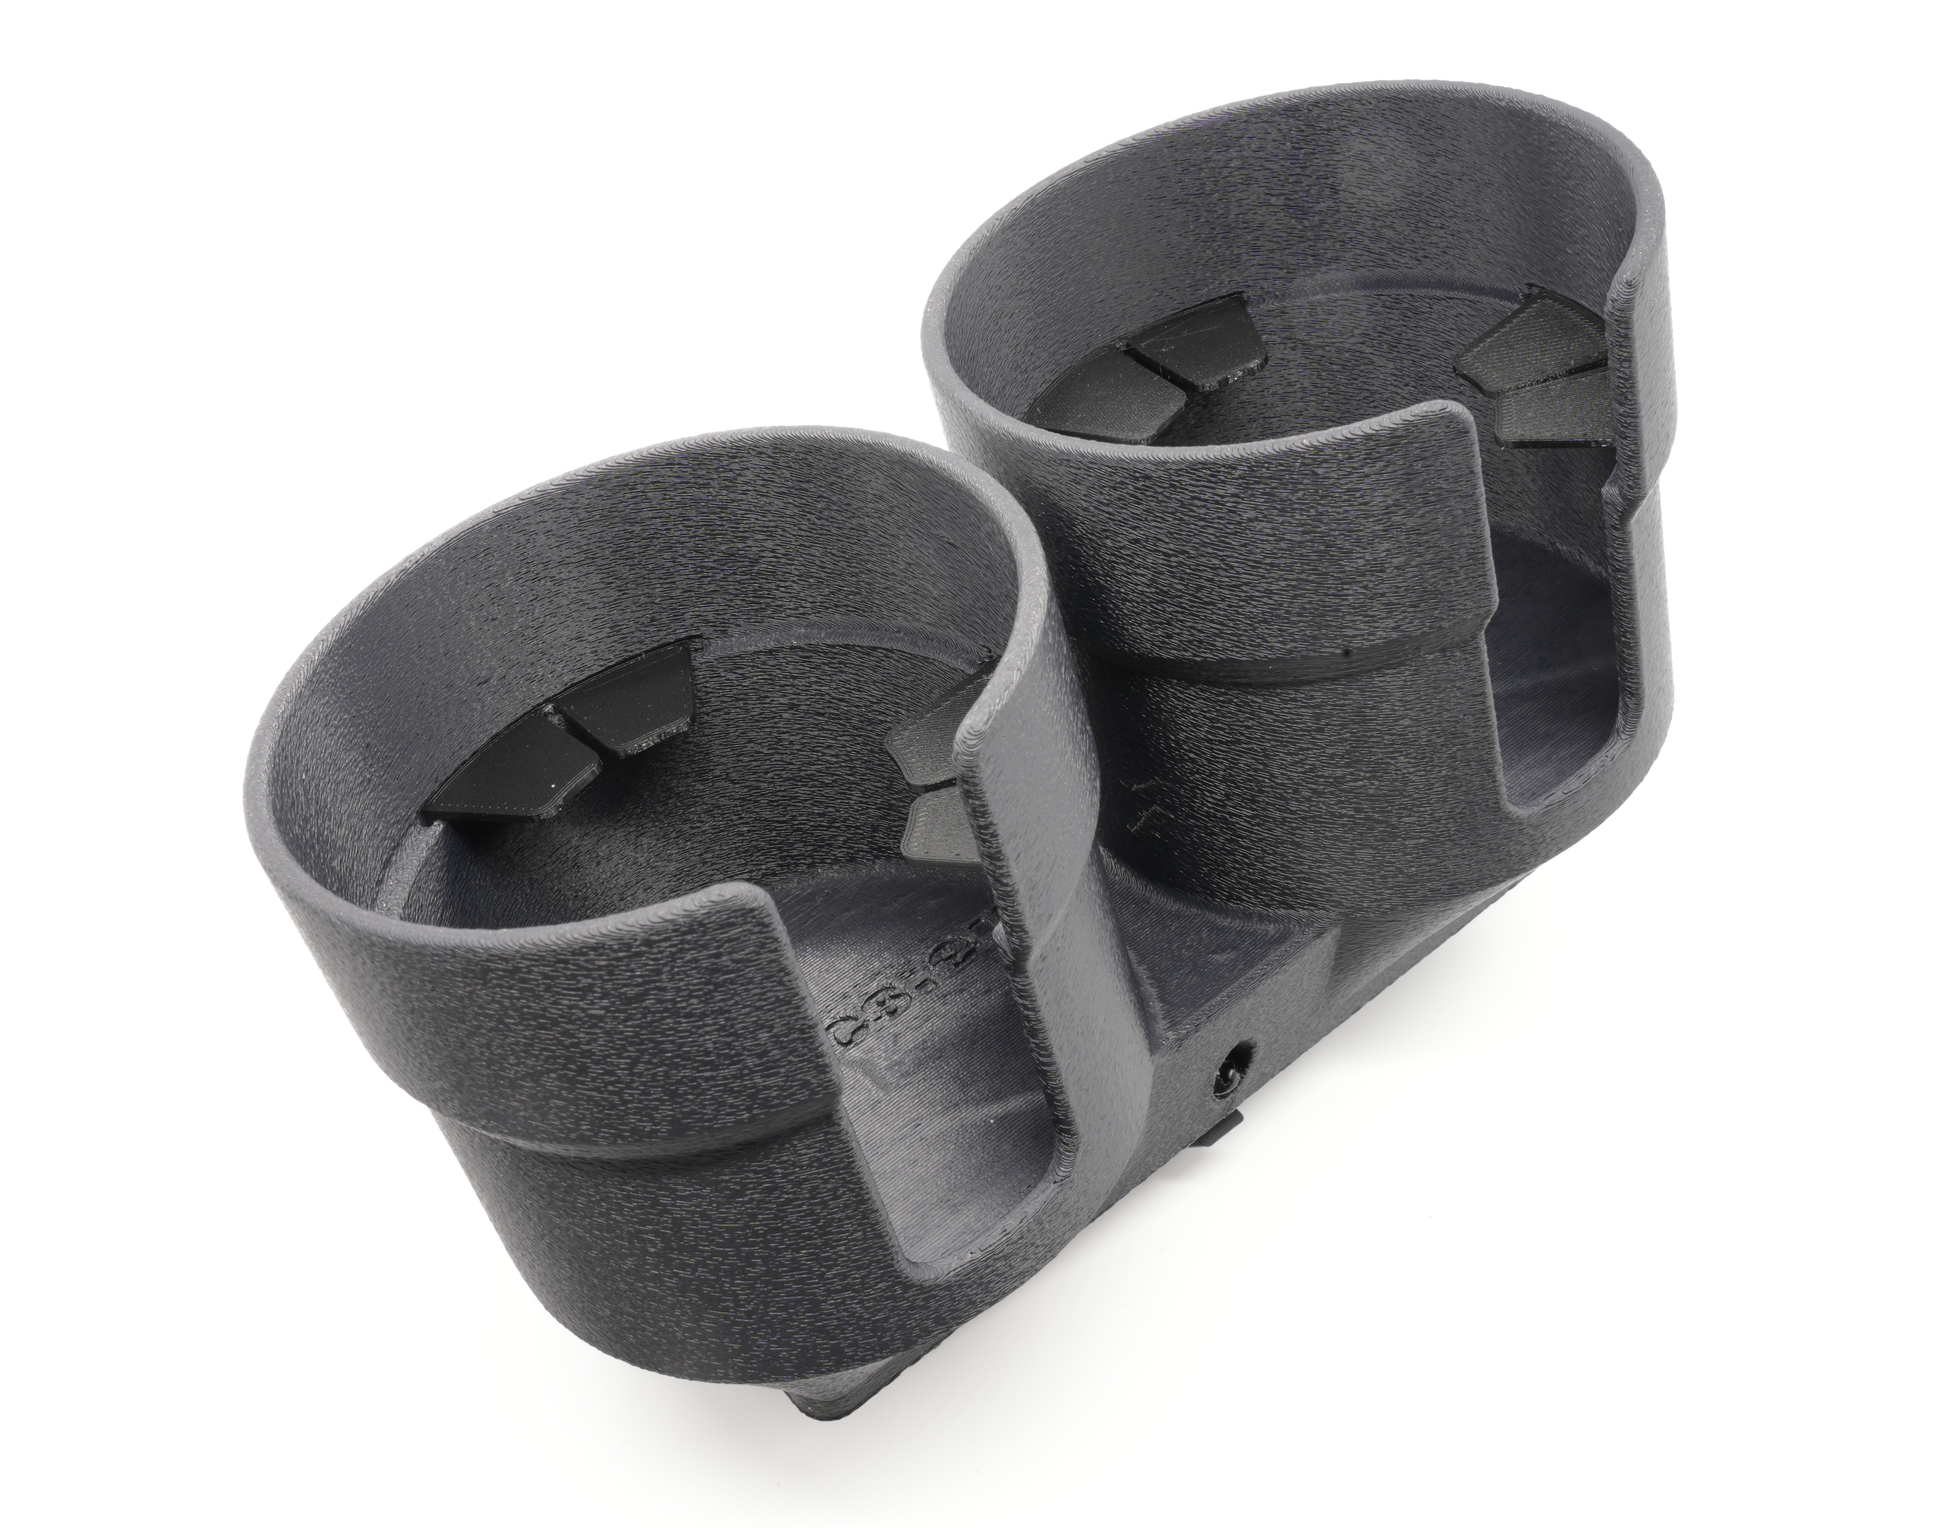 Cup holder T3 for ashtray in the dashboard – T3chnics Shop